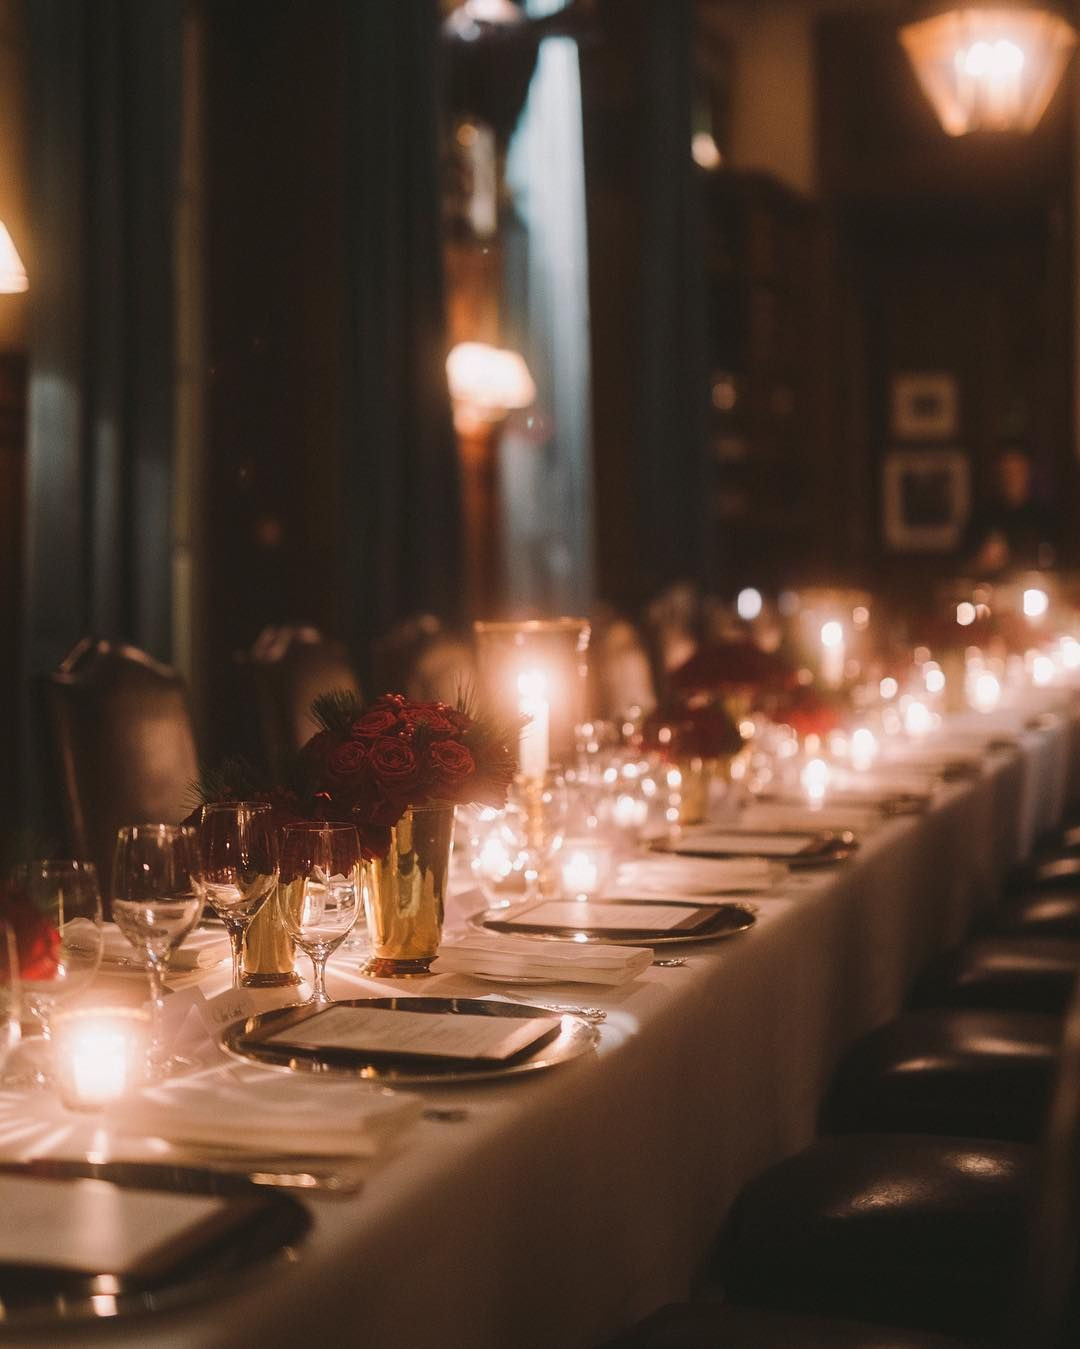 Ralphs Holiday Dinners
 Polo Ralph Lauren on Instagram “The festive setting at